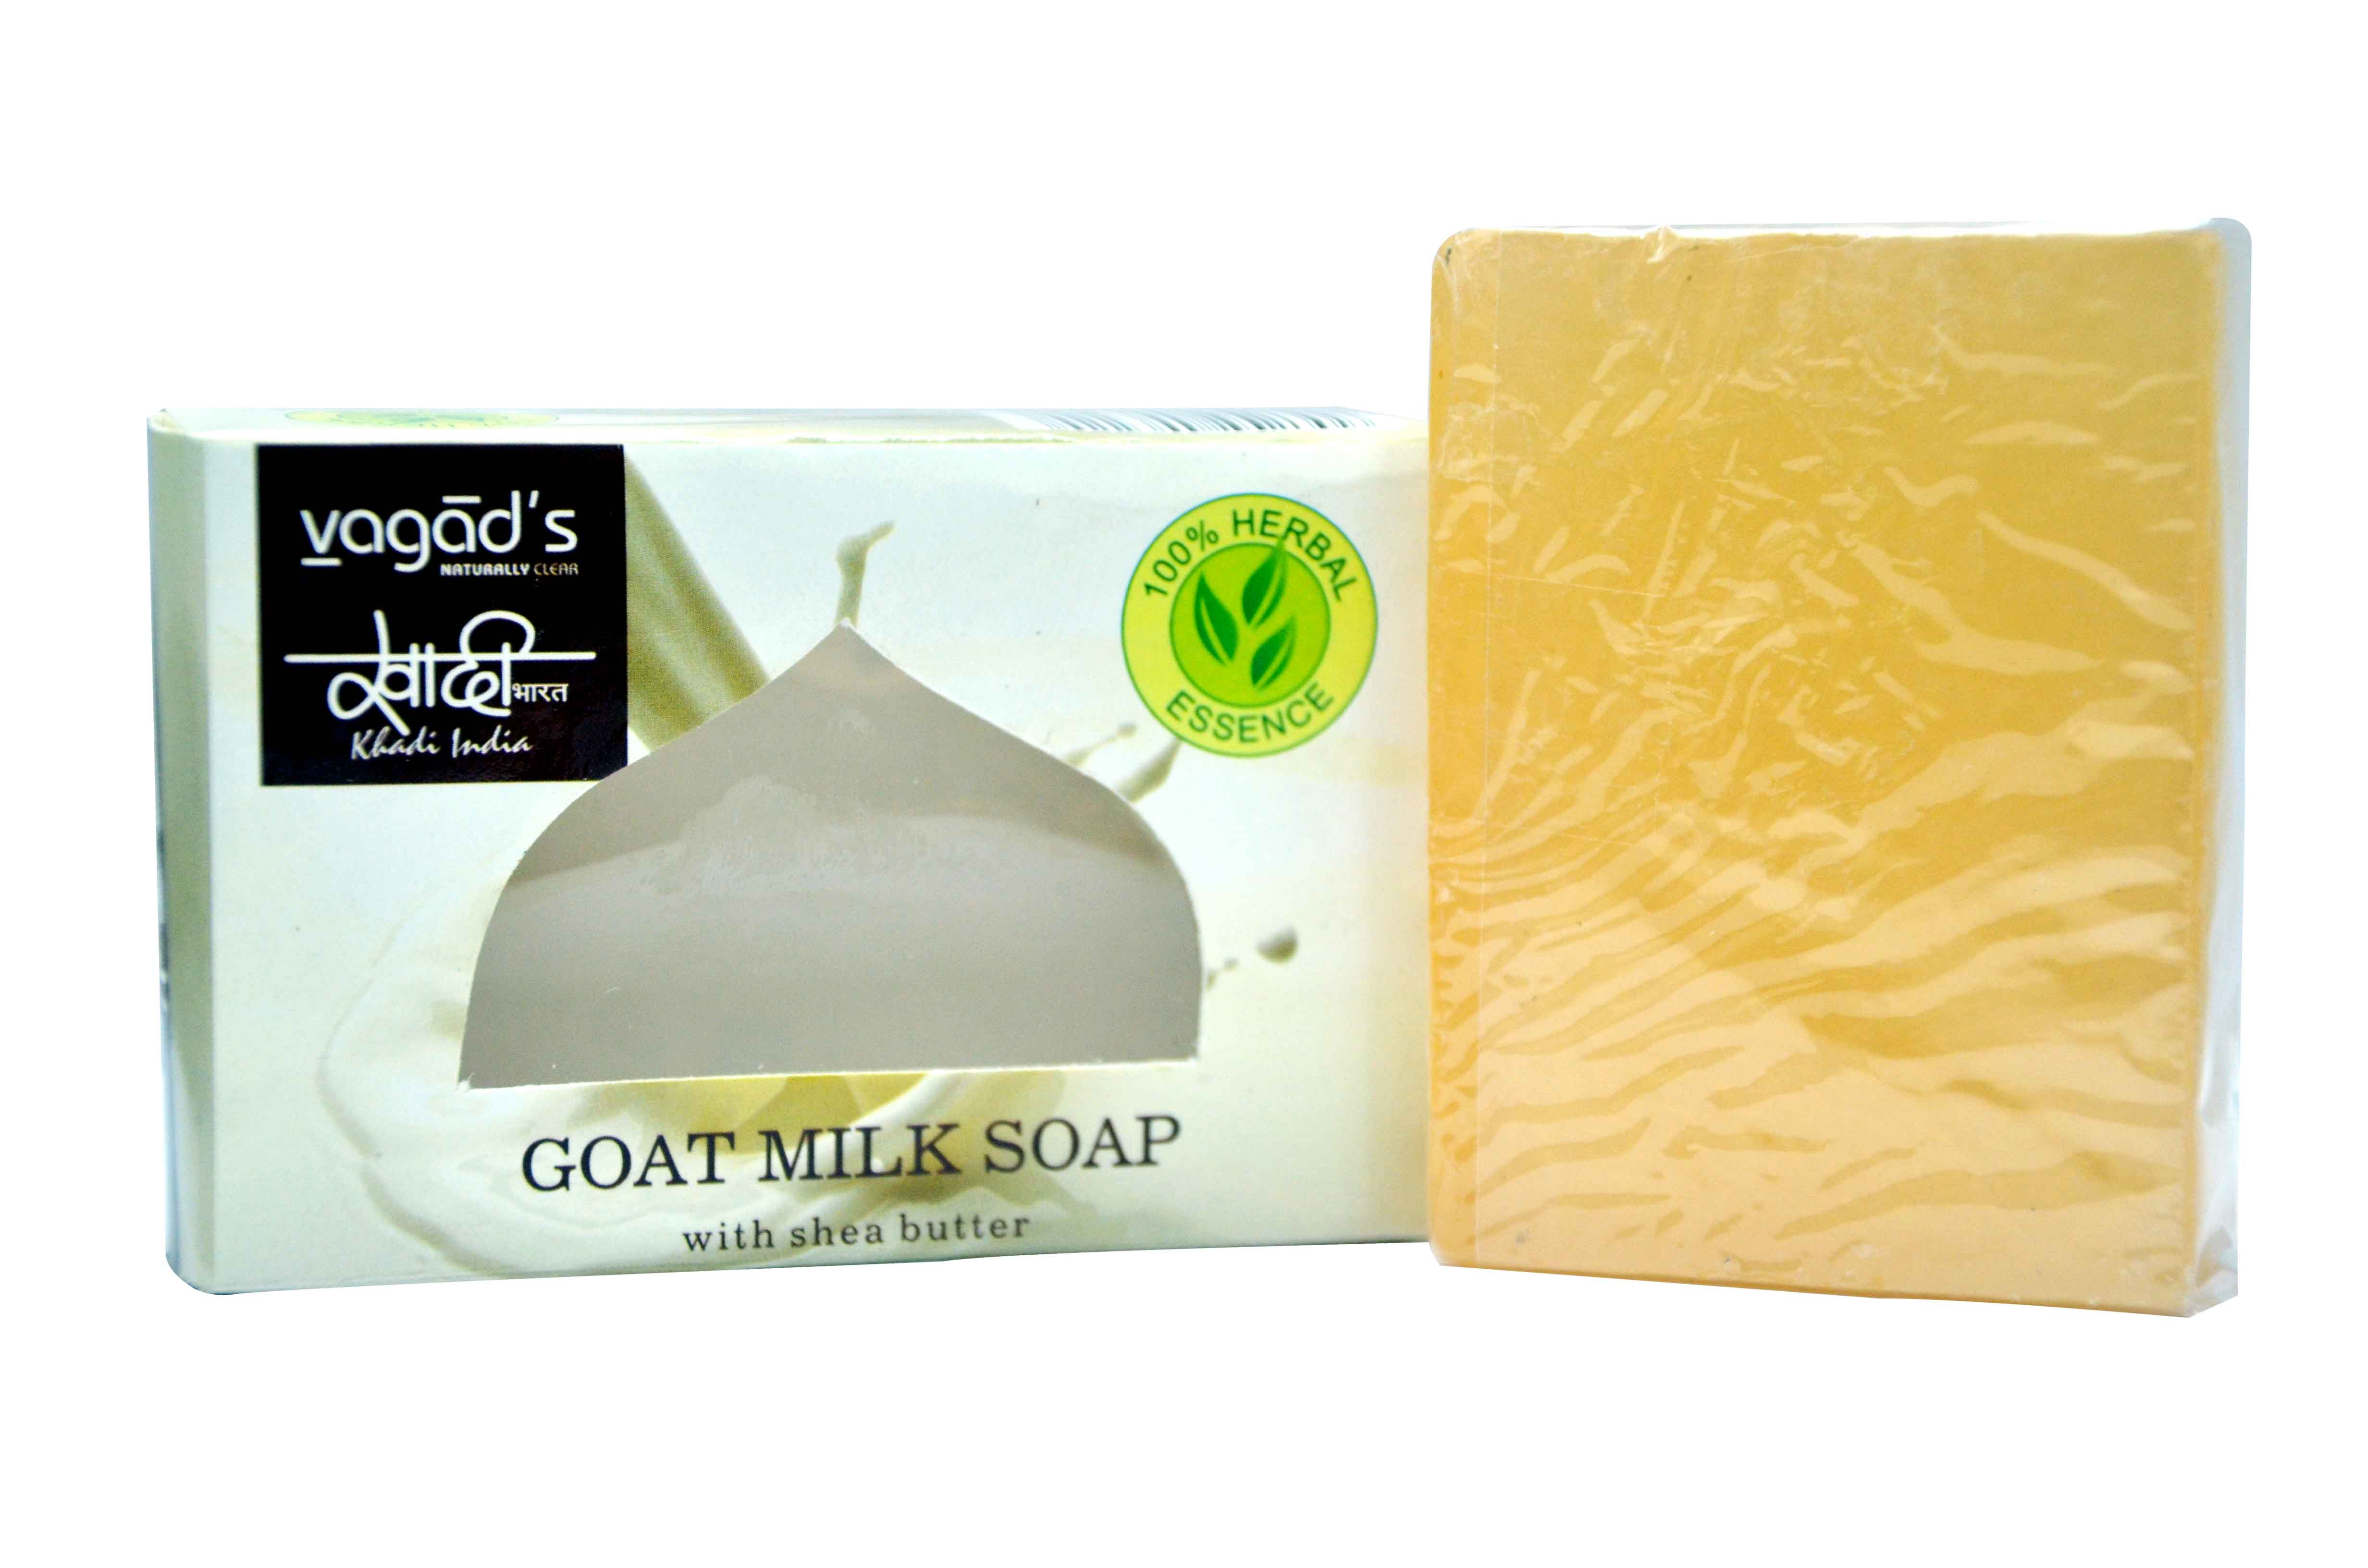 Buy Vagad's Khadi Goat Milk Soap With Shea Butter at Best Price Online